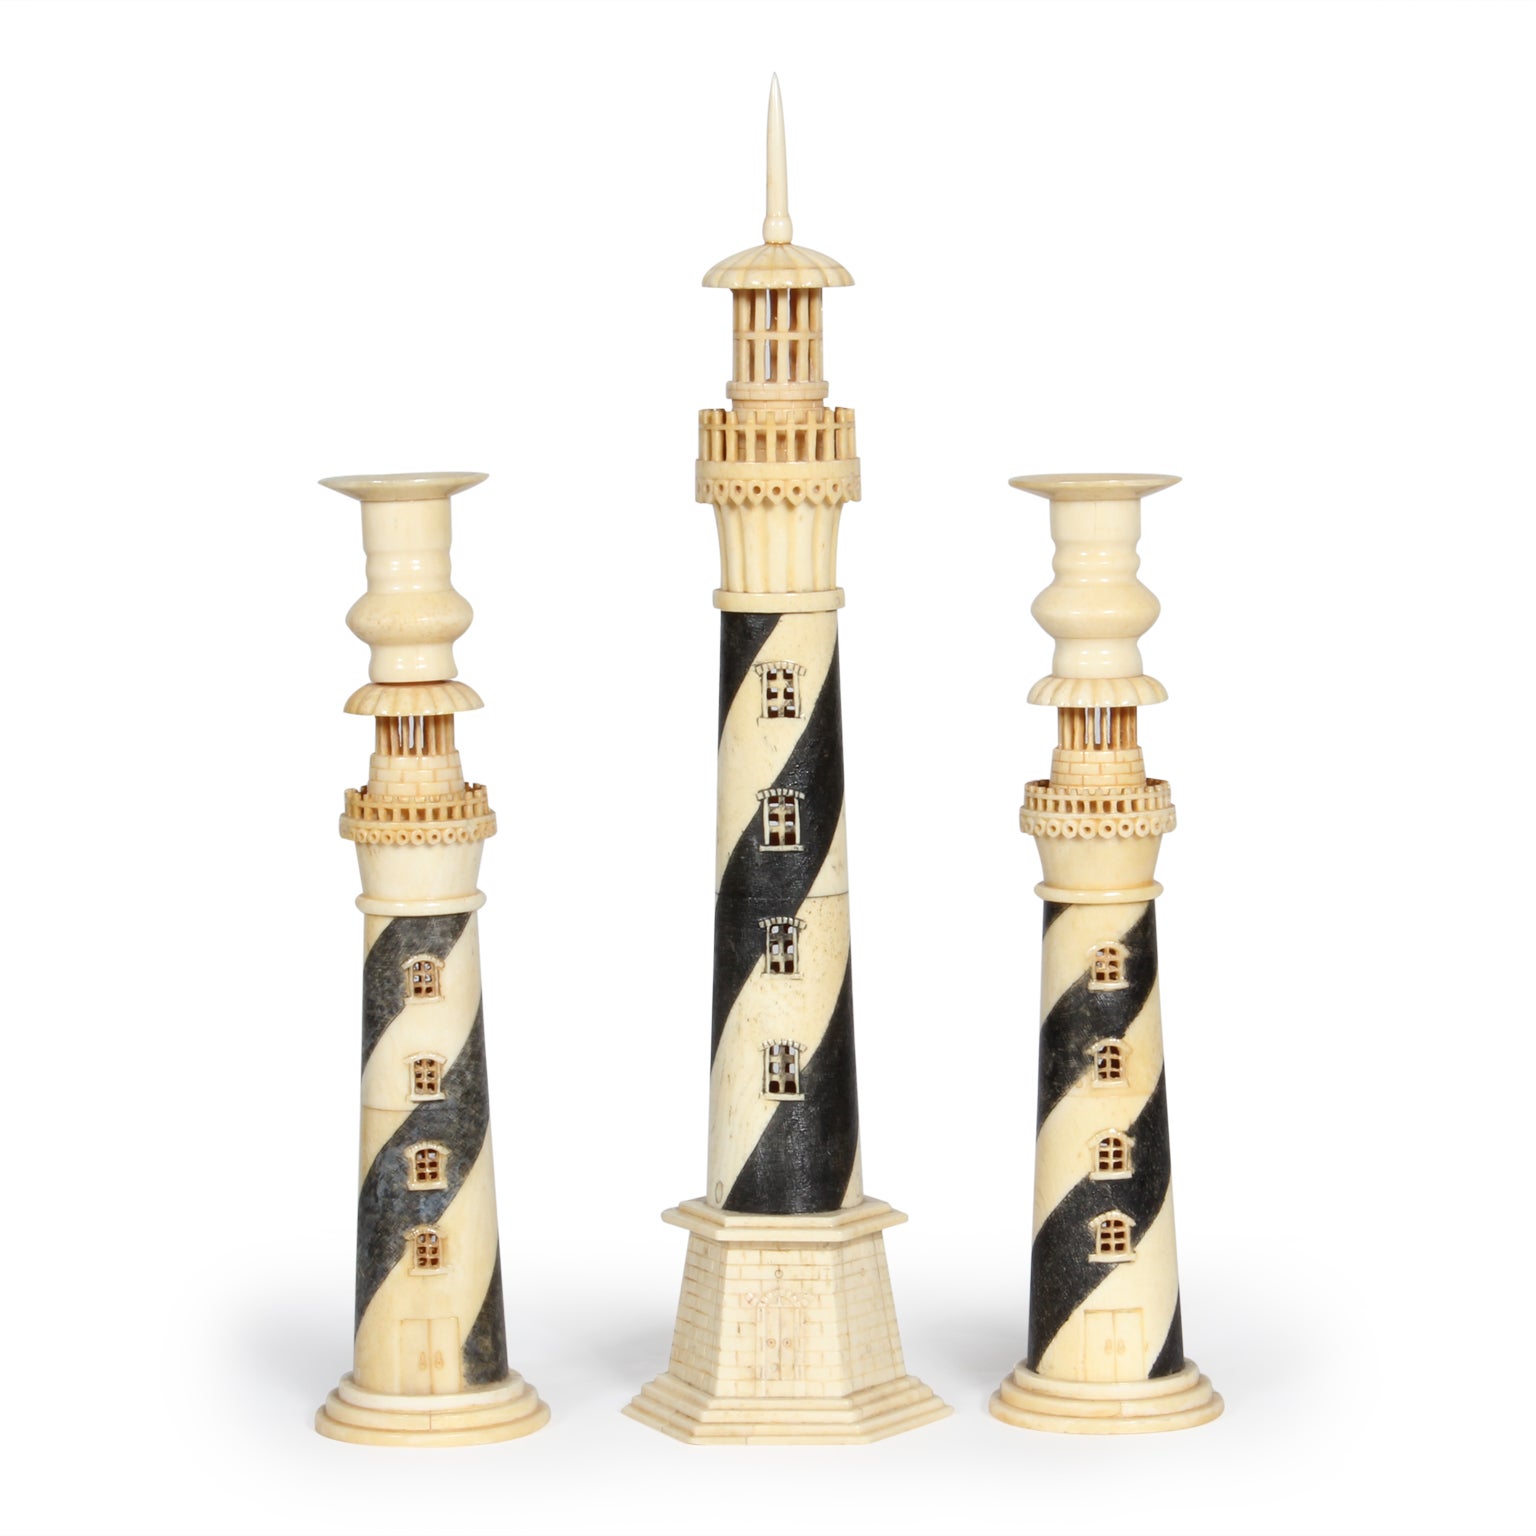 19th Century Anglo-Indian Lighthouse Centerpiece with Lighthouse Candle Holders